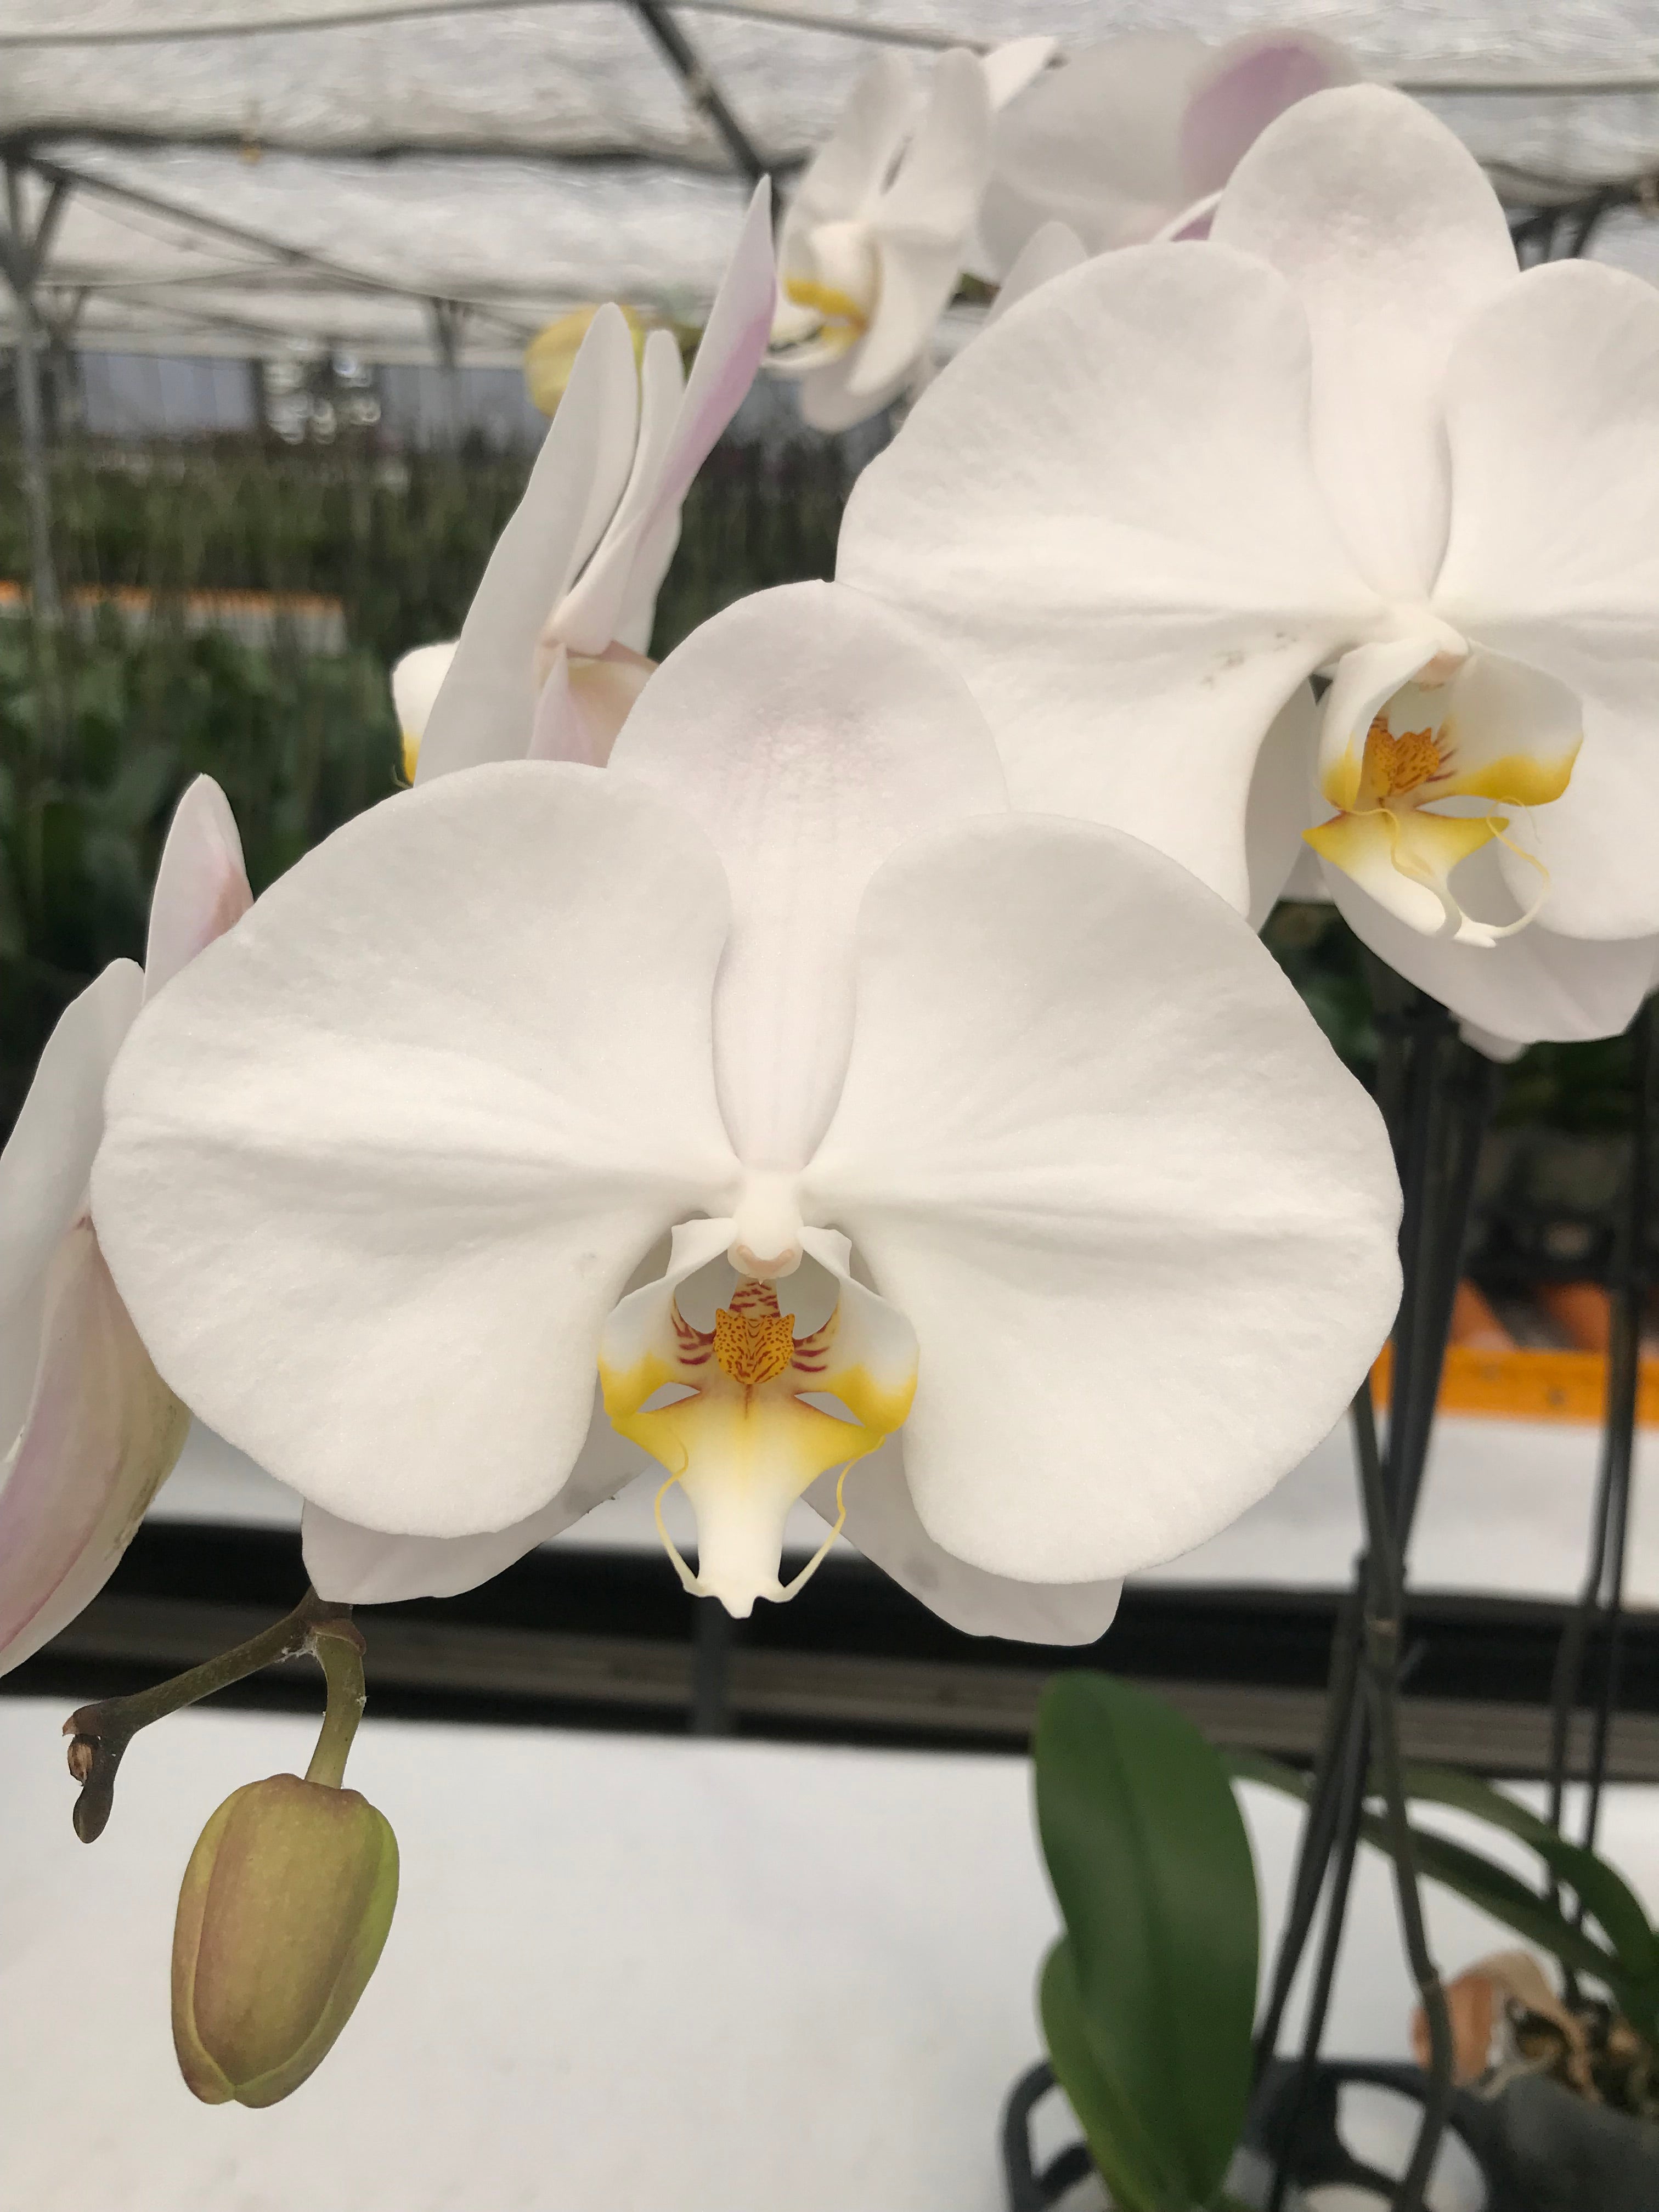 Orchid Flowers & Plants Delivery: Send Orchids | Proflowers